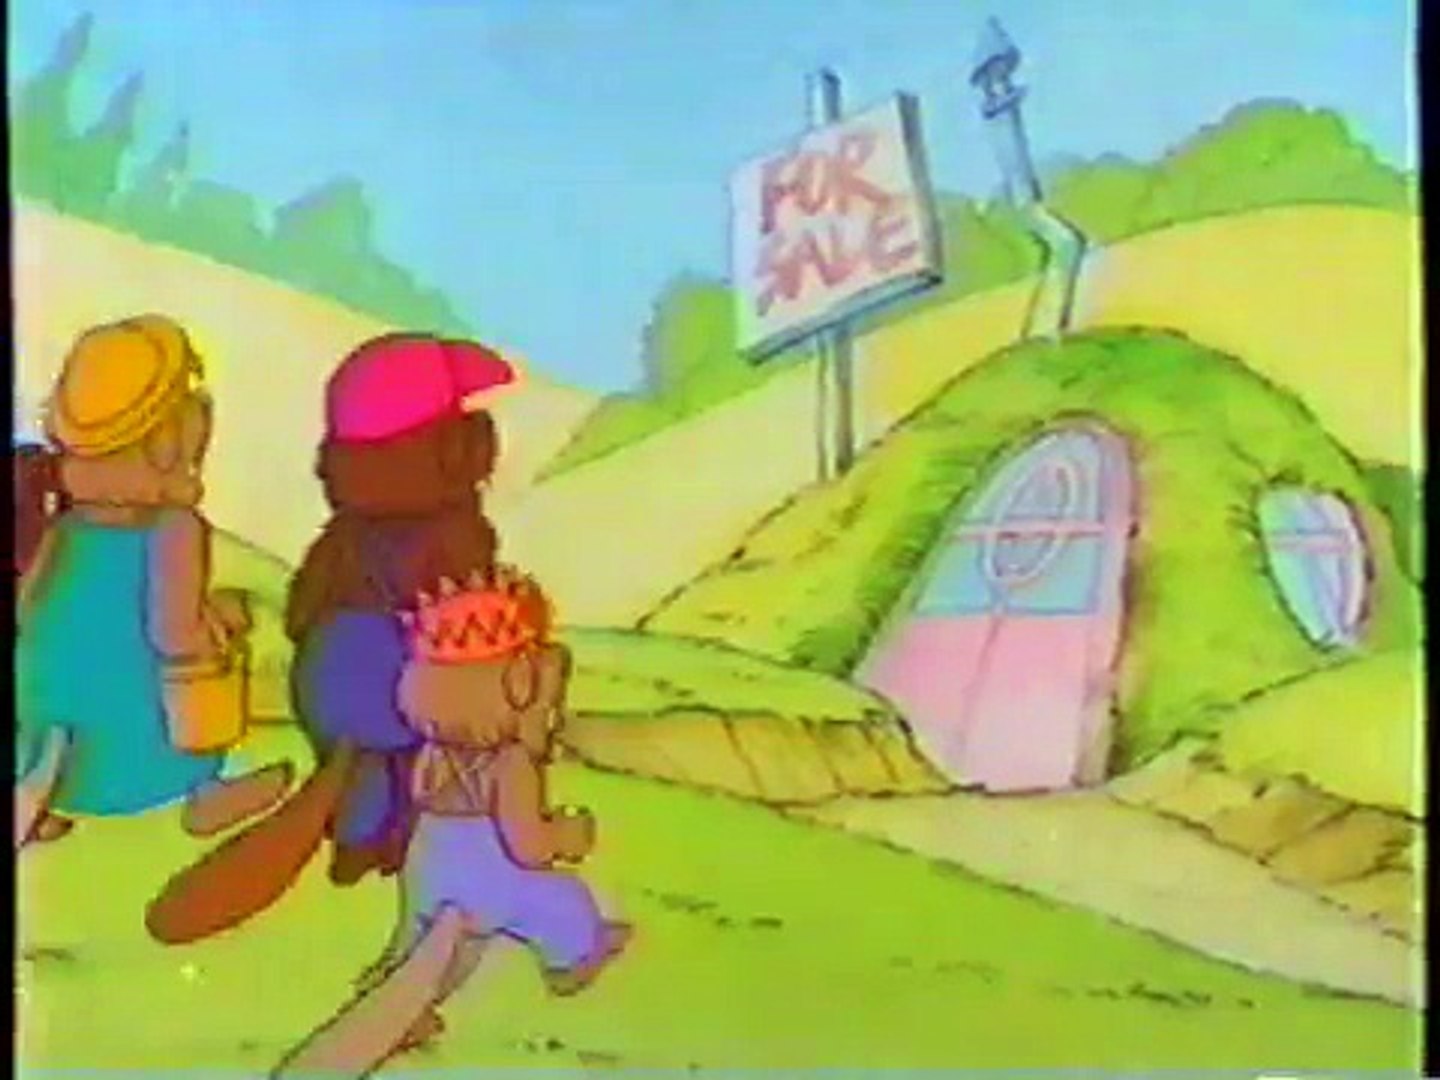 The Berenstain Bears and the Neighborly Skunk